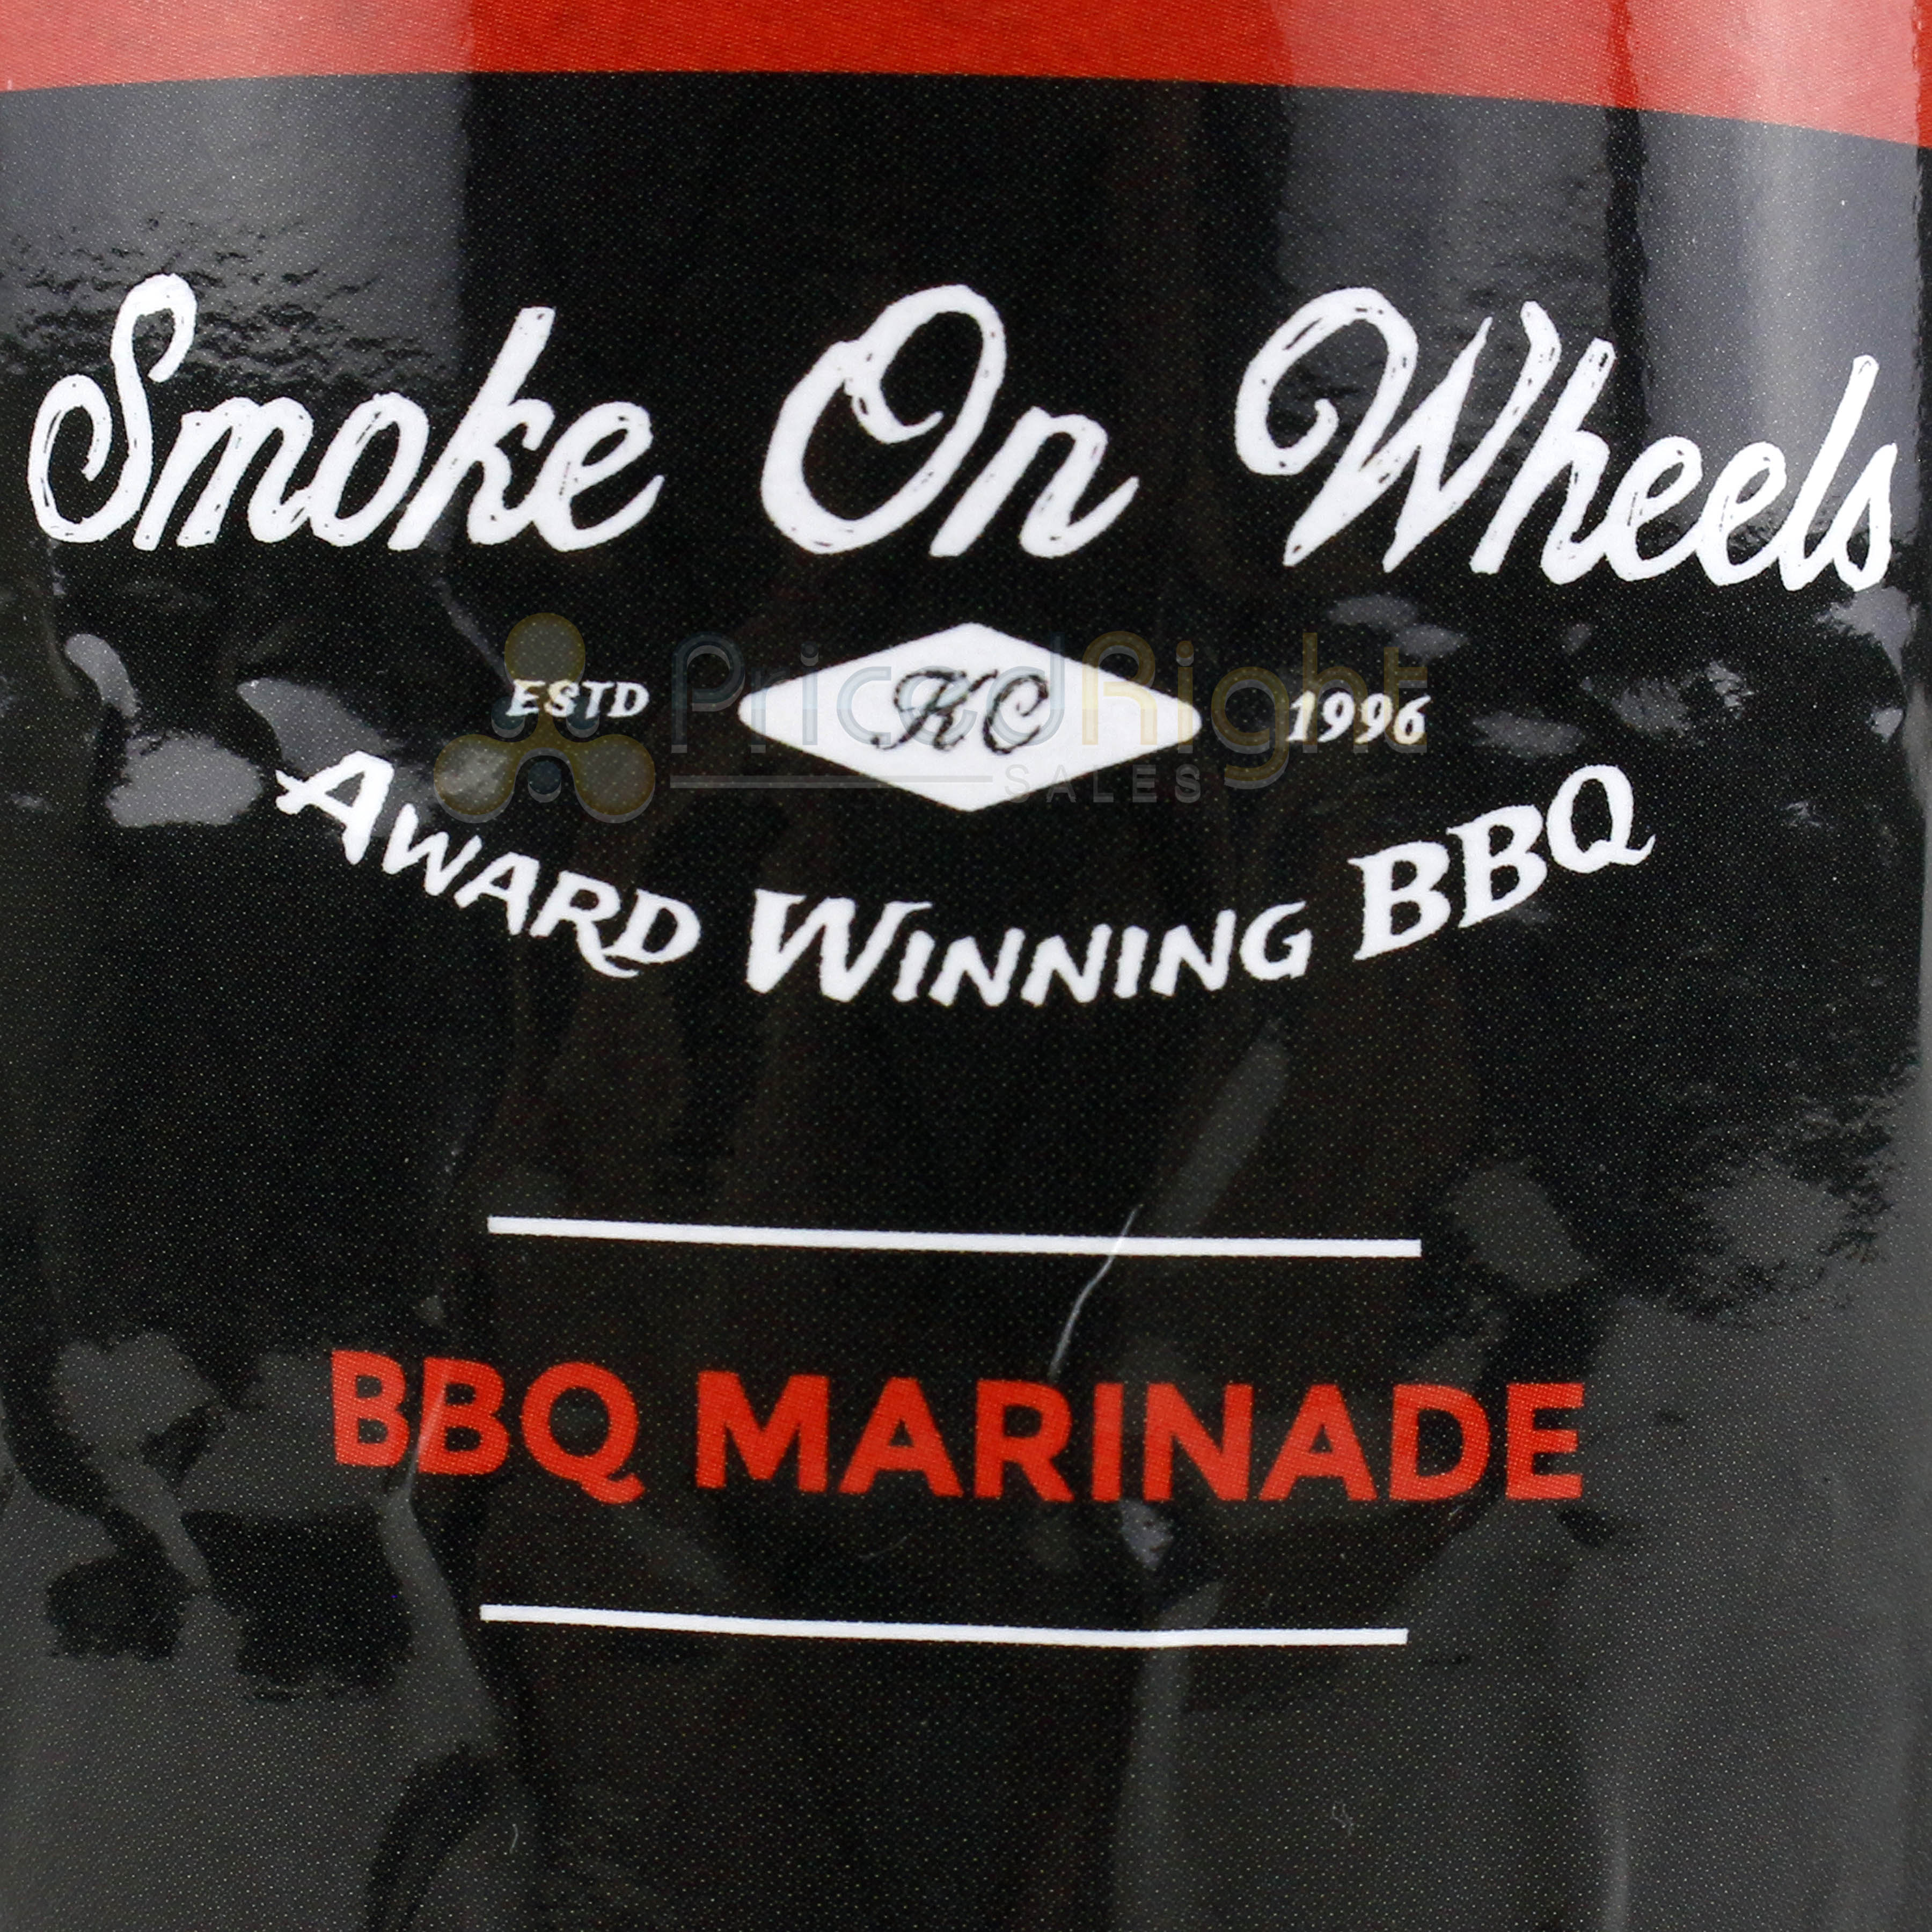 Smoke on Wheels 16oz BBQ Marinade Gluten and Msg Free Competition Rated Flavor